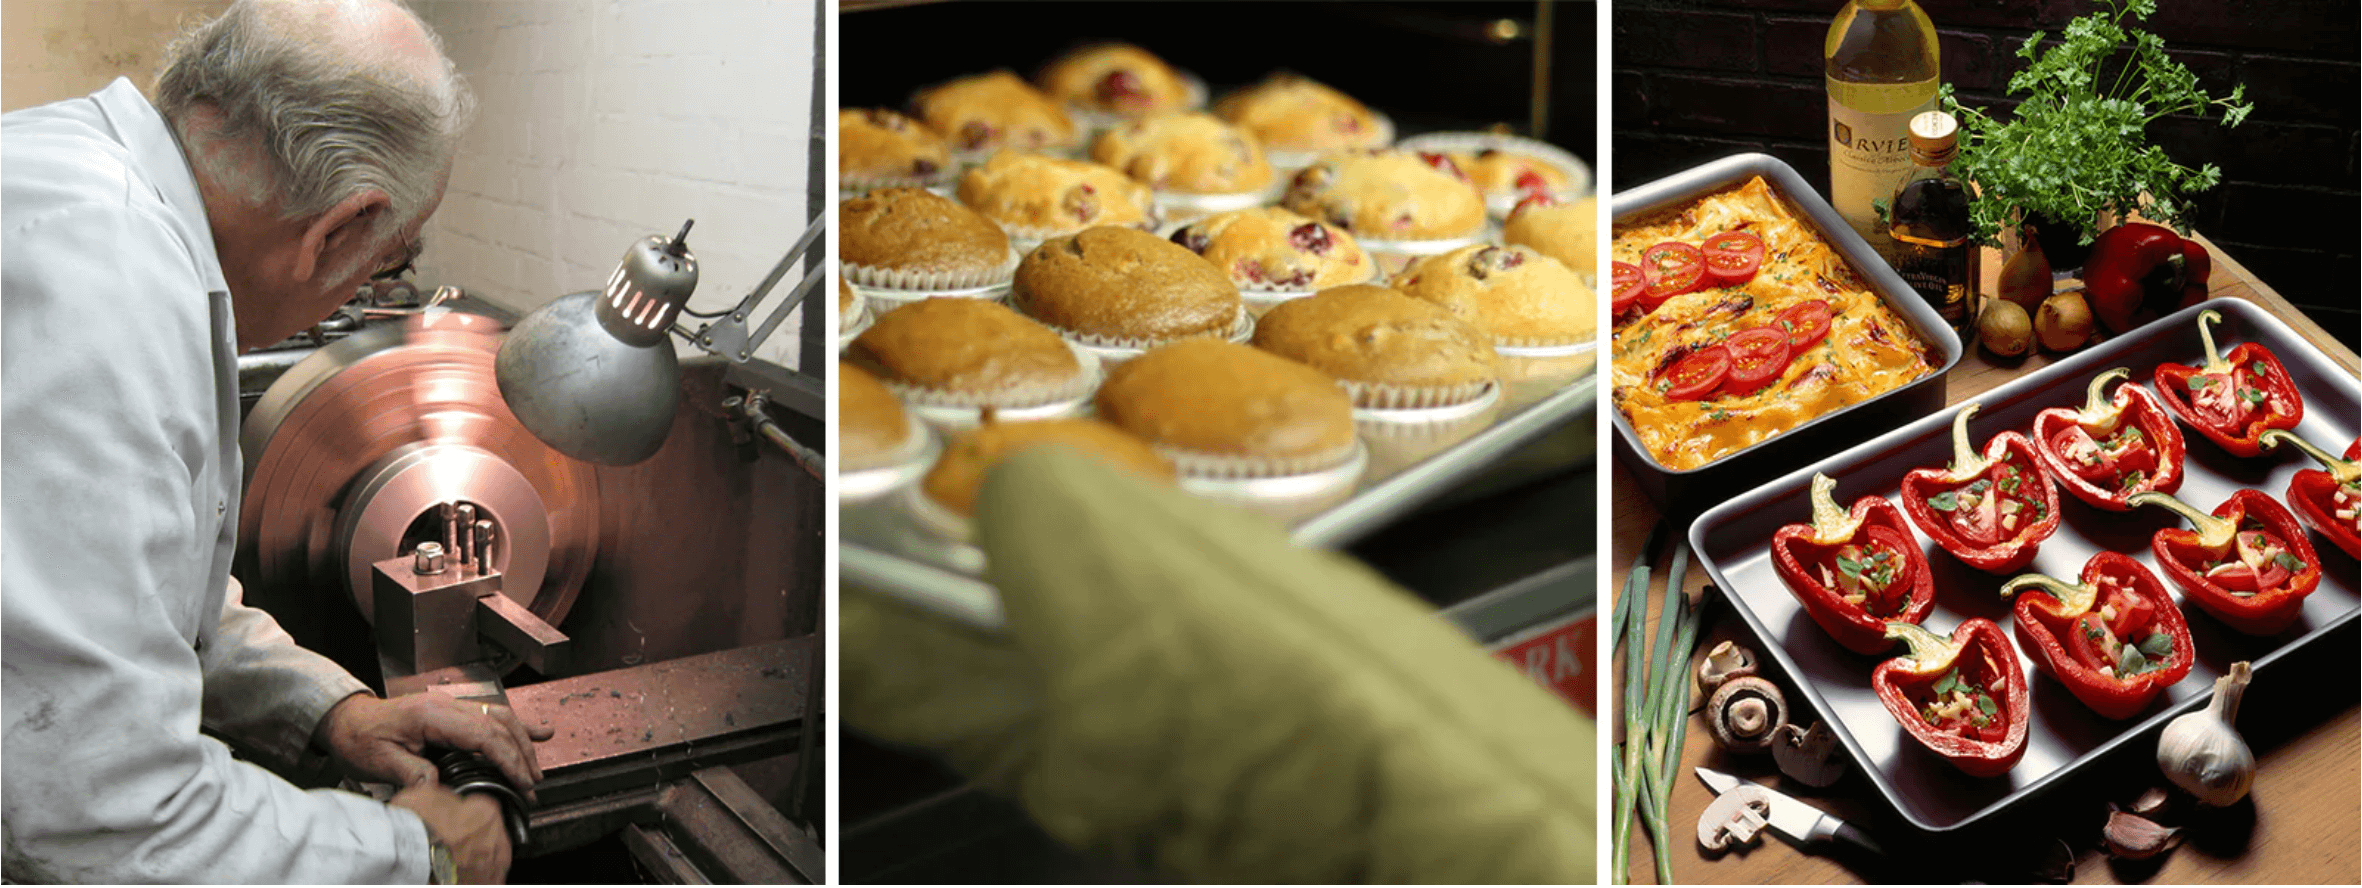 A montage of three shots next to each other showing someone making Silverwood Bakeware with a tool, a tray of fruit muffins in a tray and some stuffed peppers and a pasta bake with some tomatoes on top in silverwood roasting trays. 